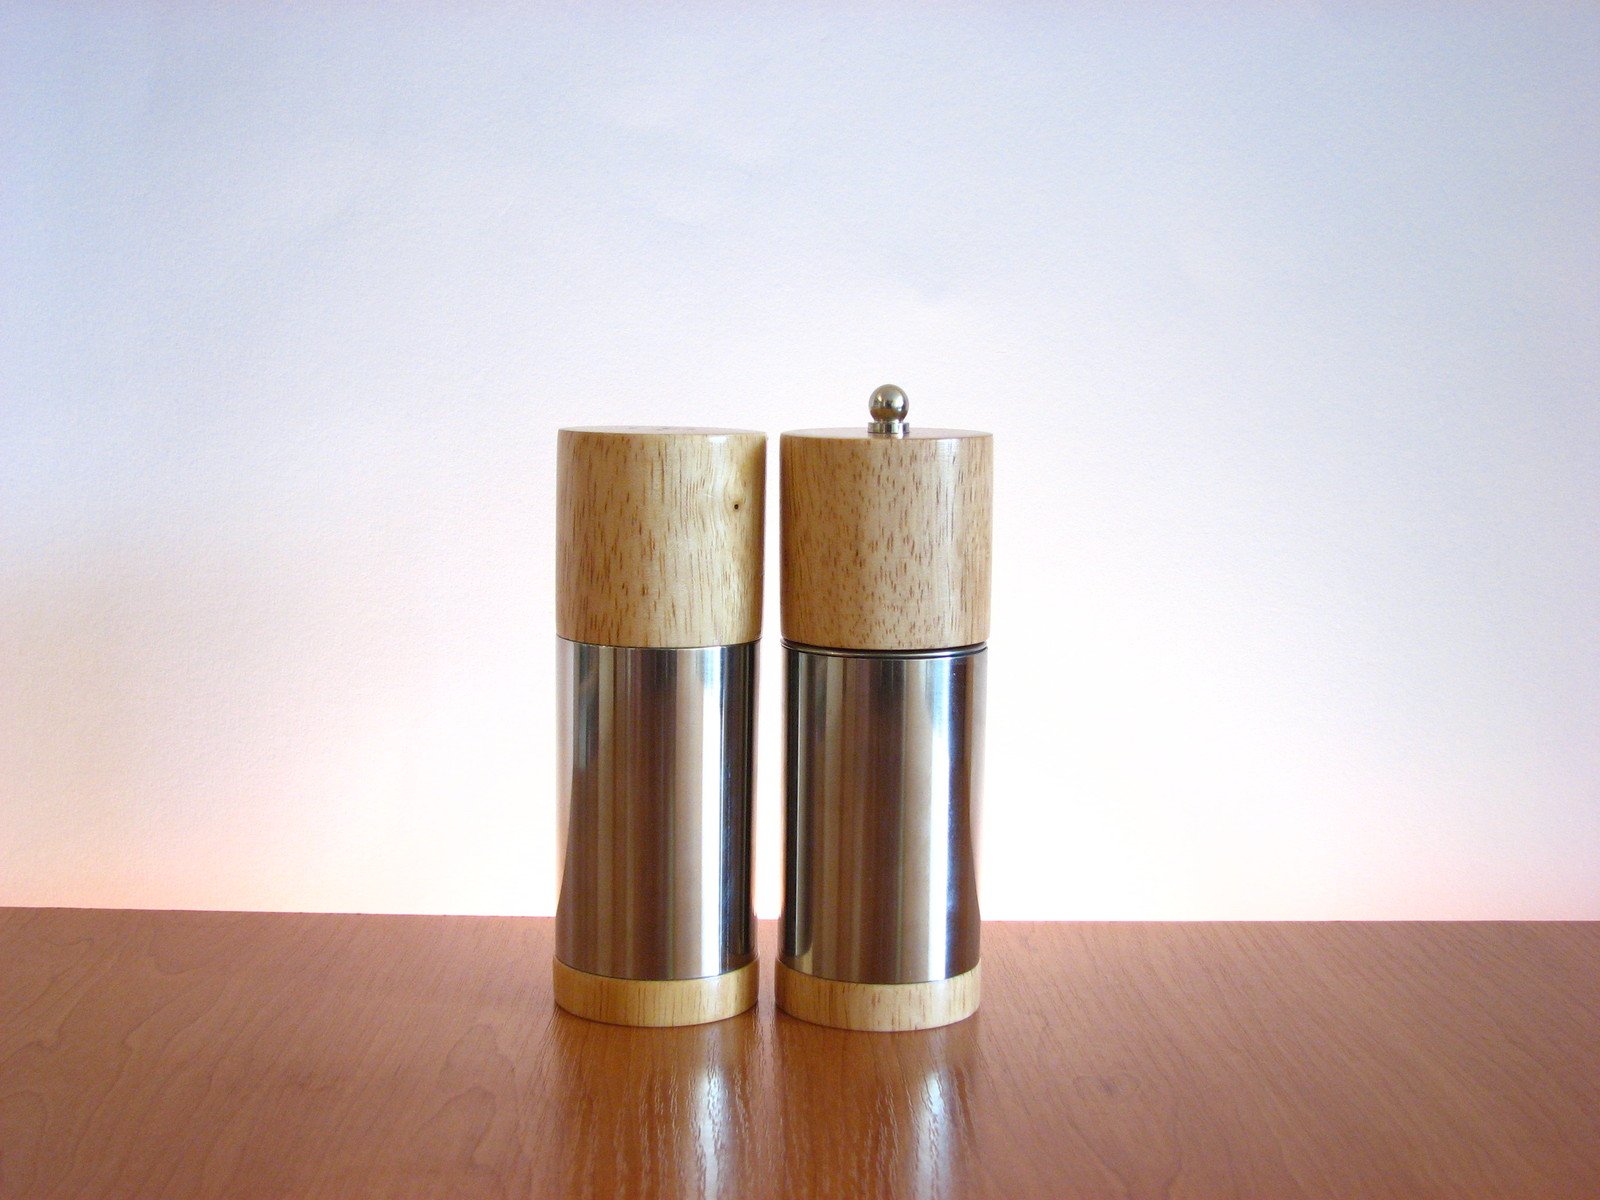 two metal containers on a wooden table with a beige wall behind them